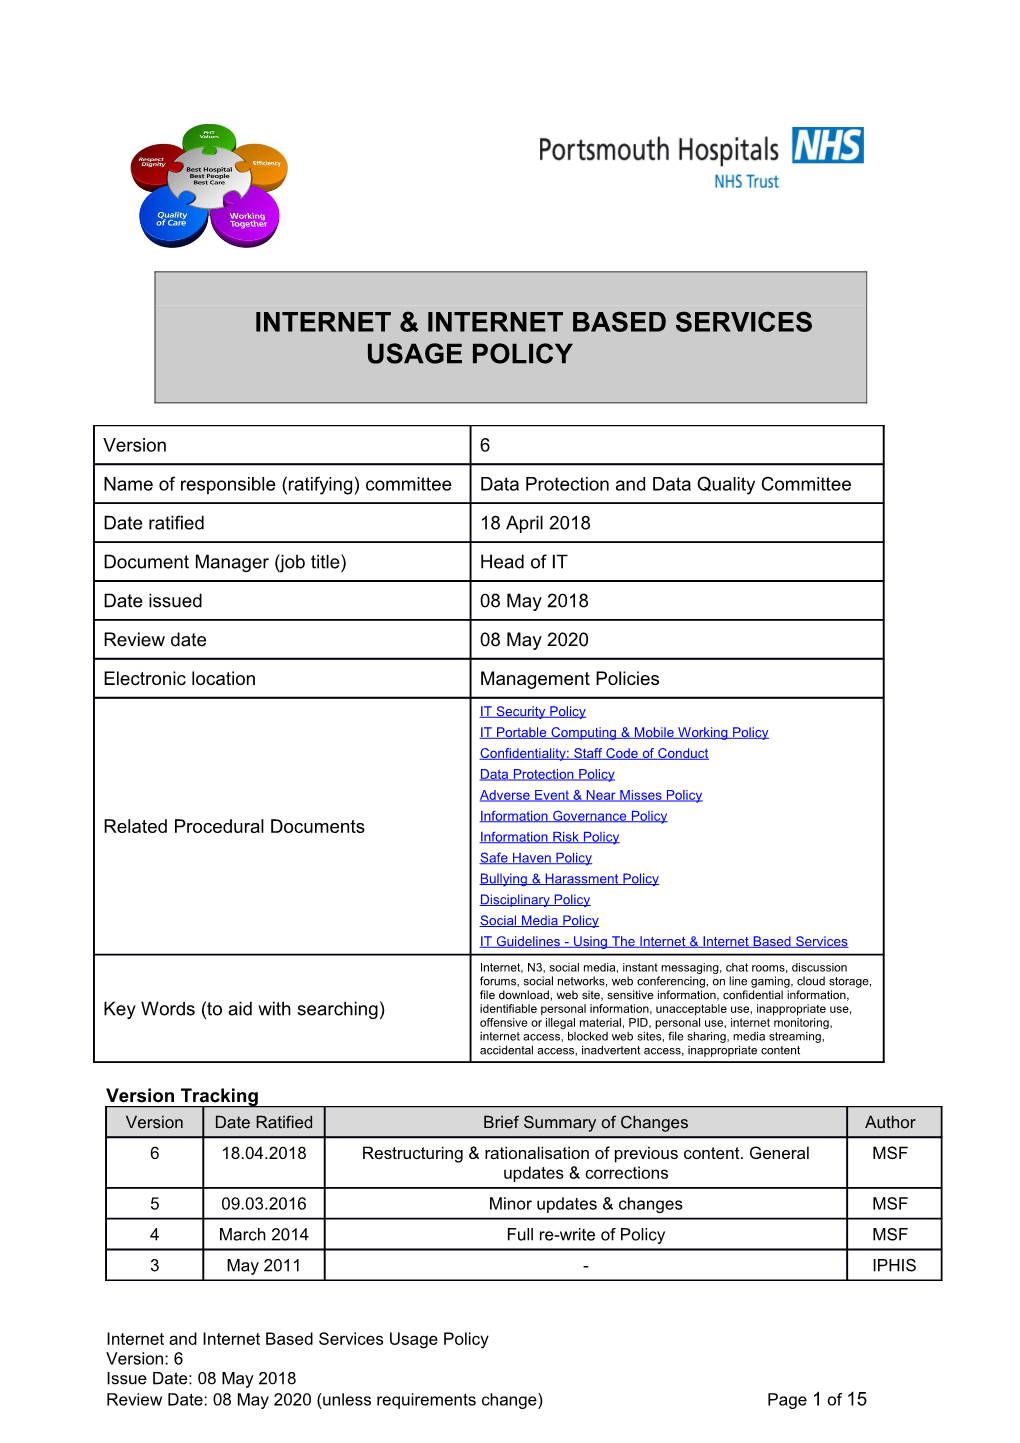 Internet & Internet Based Services Usage Policy